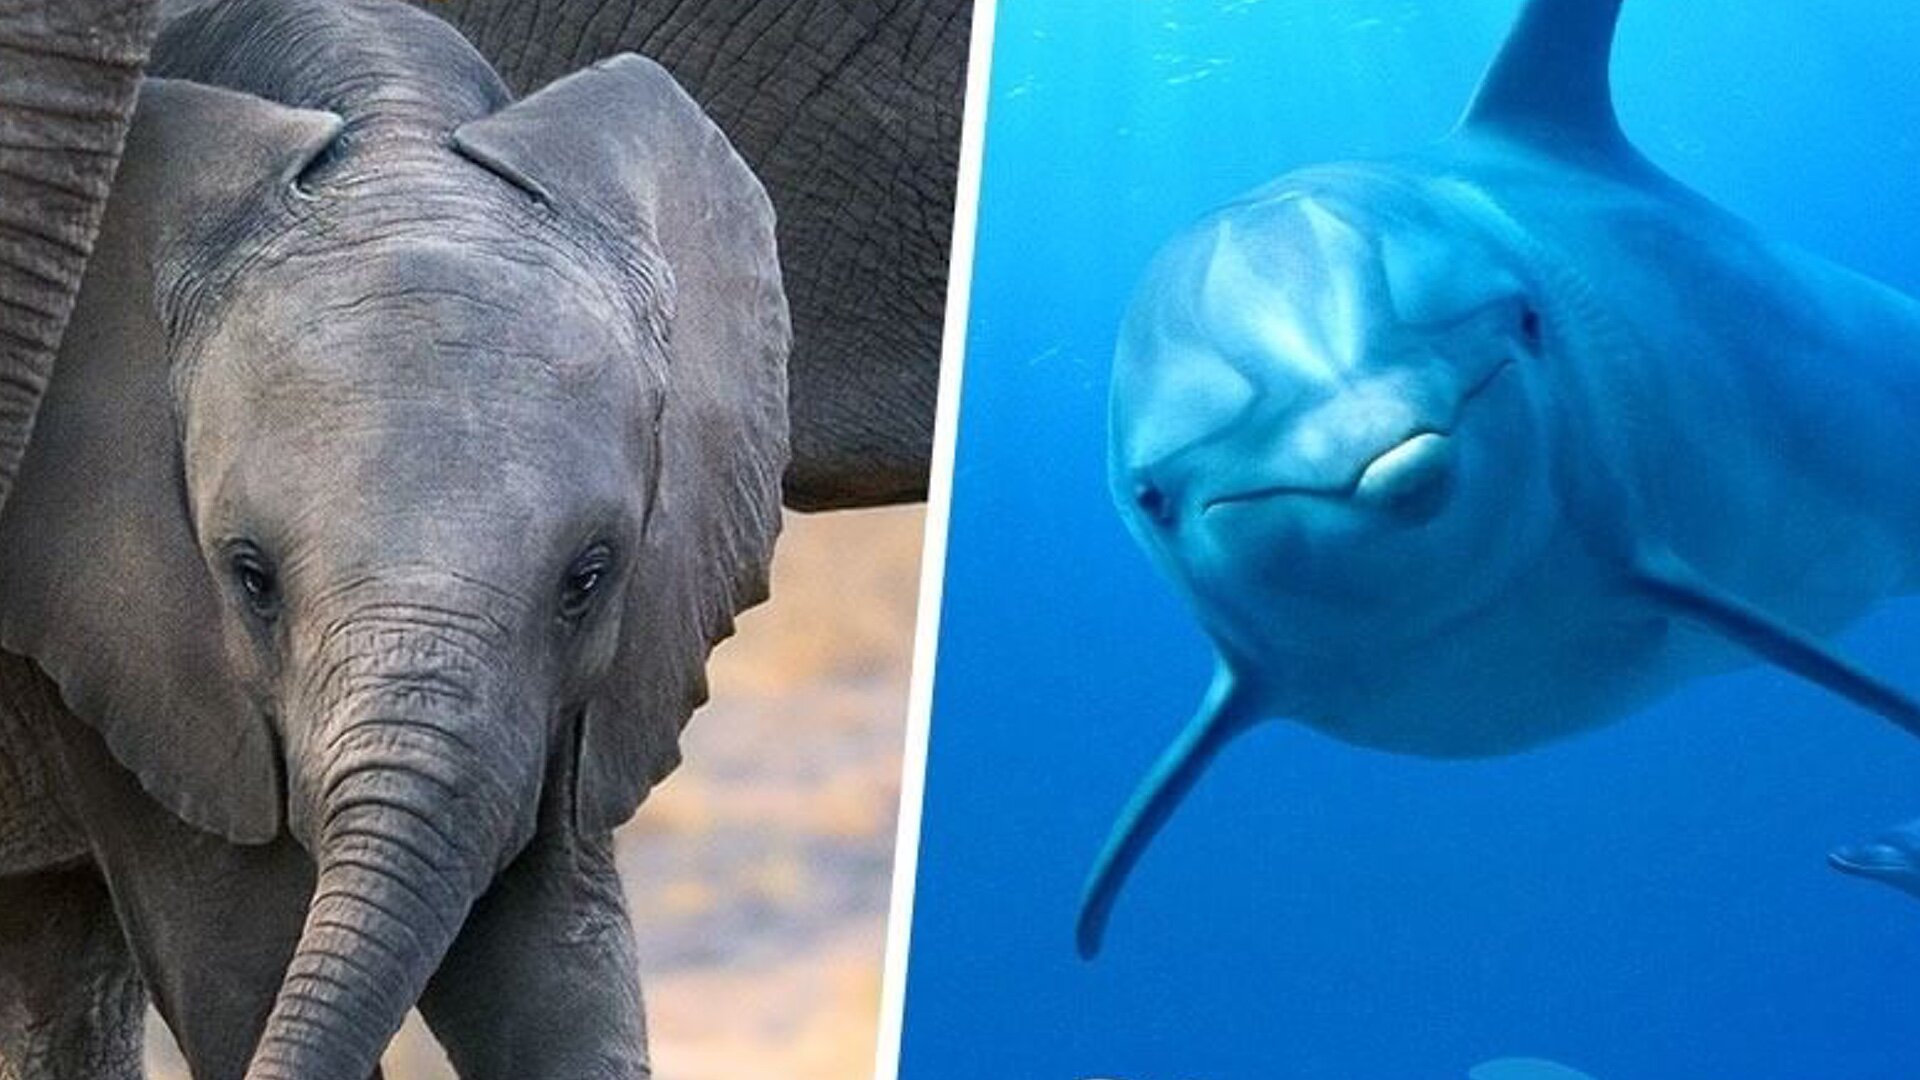 What Type of Animals are Dolphins And Elephants